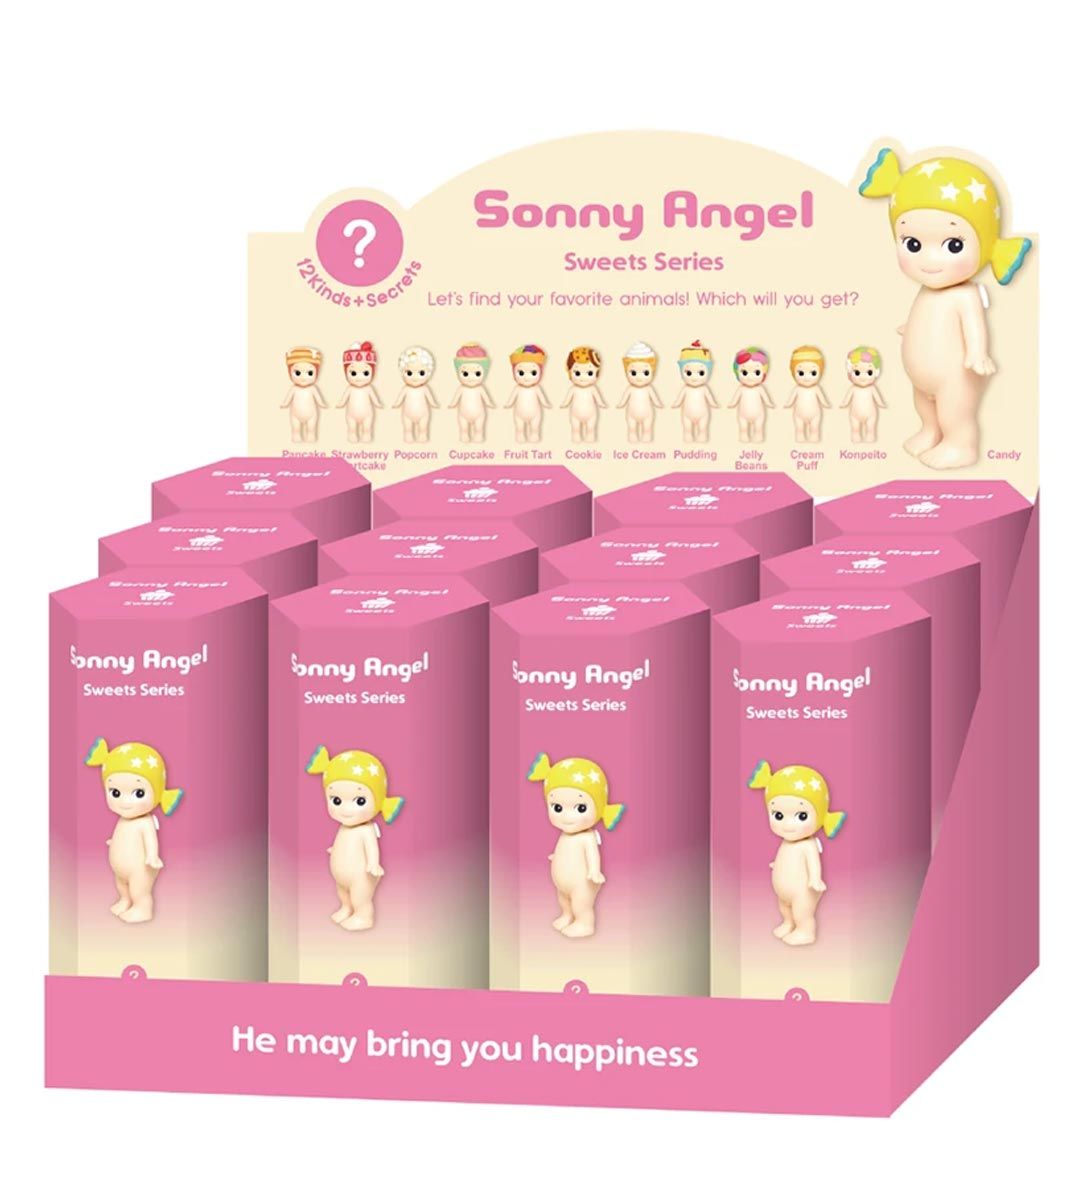 Sonny Angel - New Sweets Series